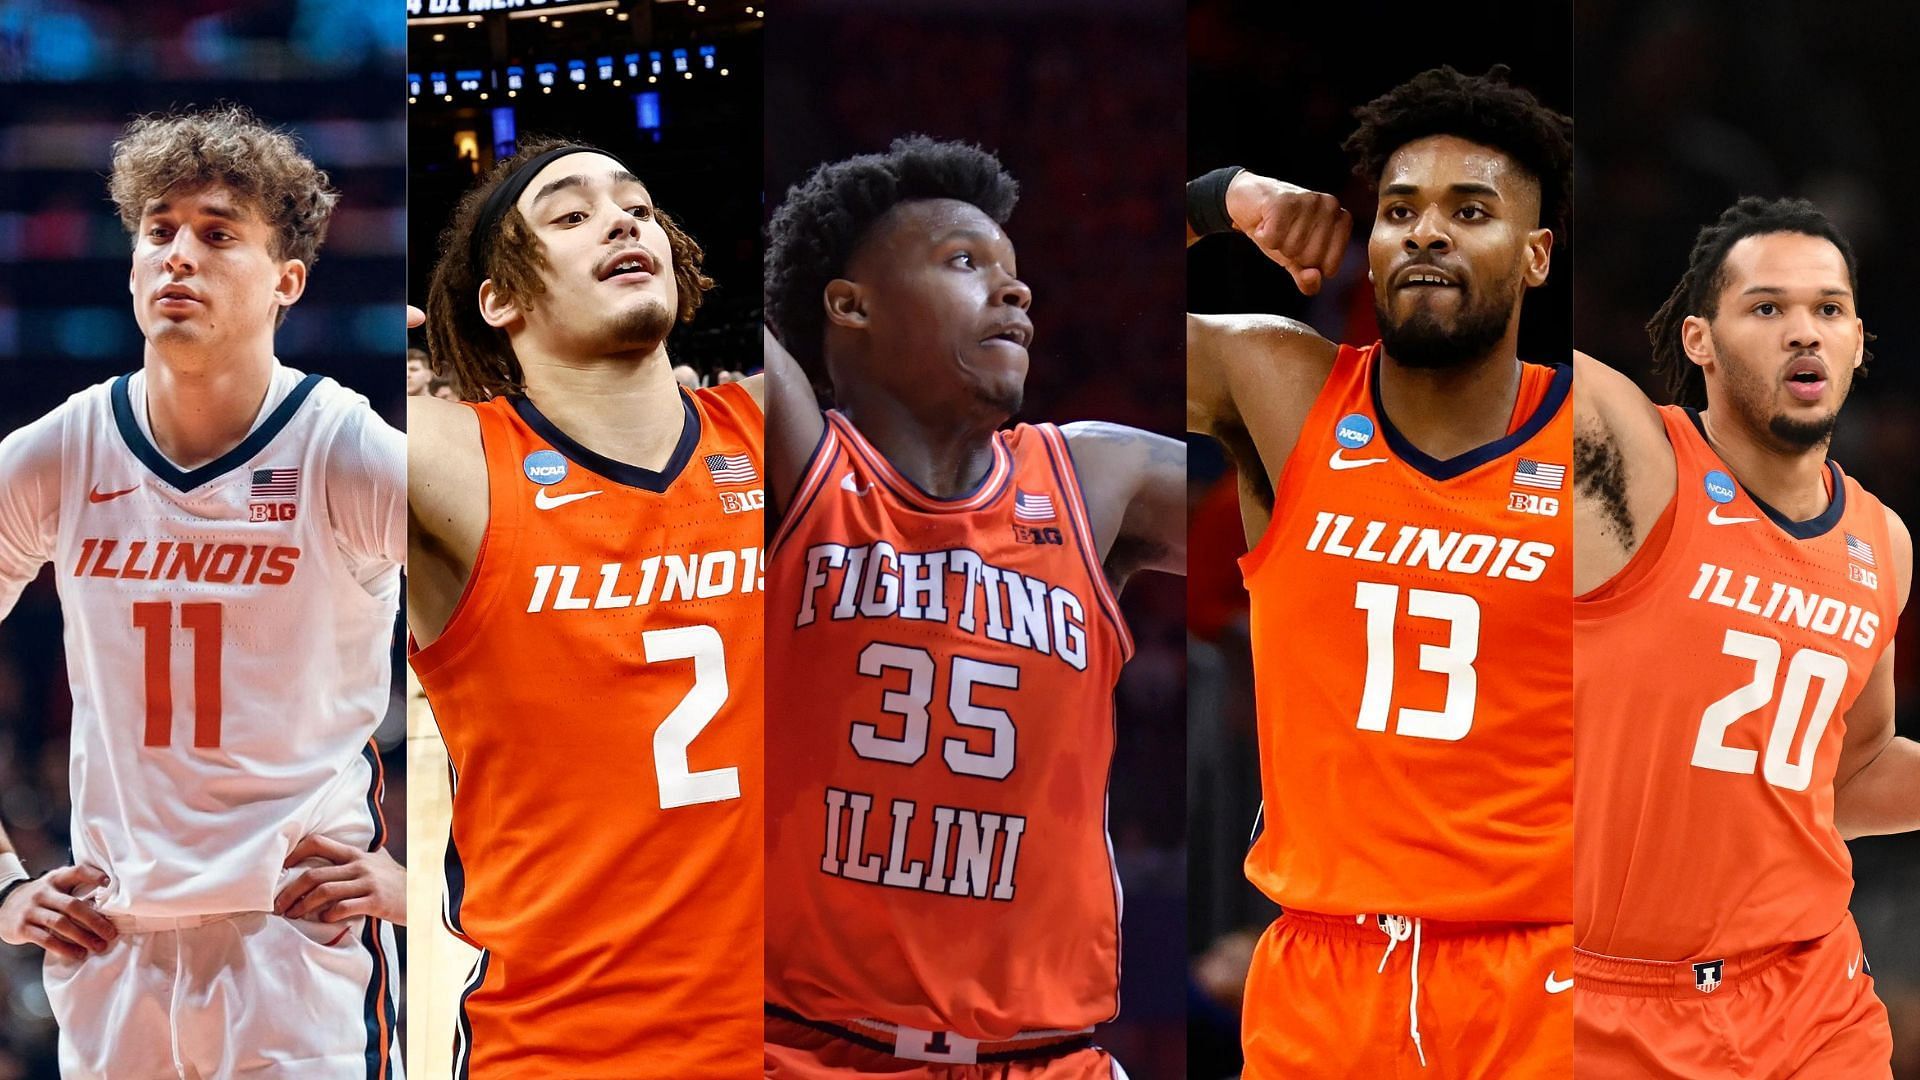 top 5 returning players for Illinois